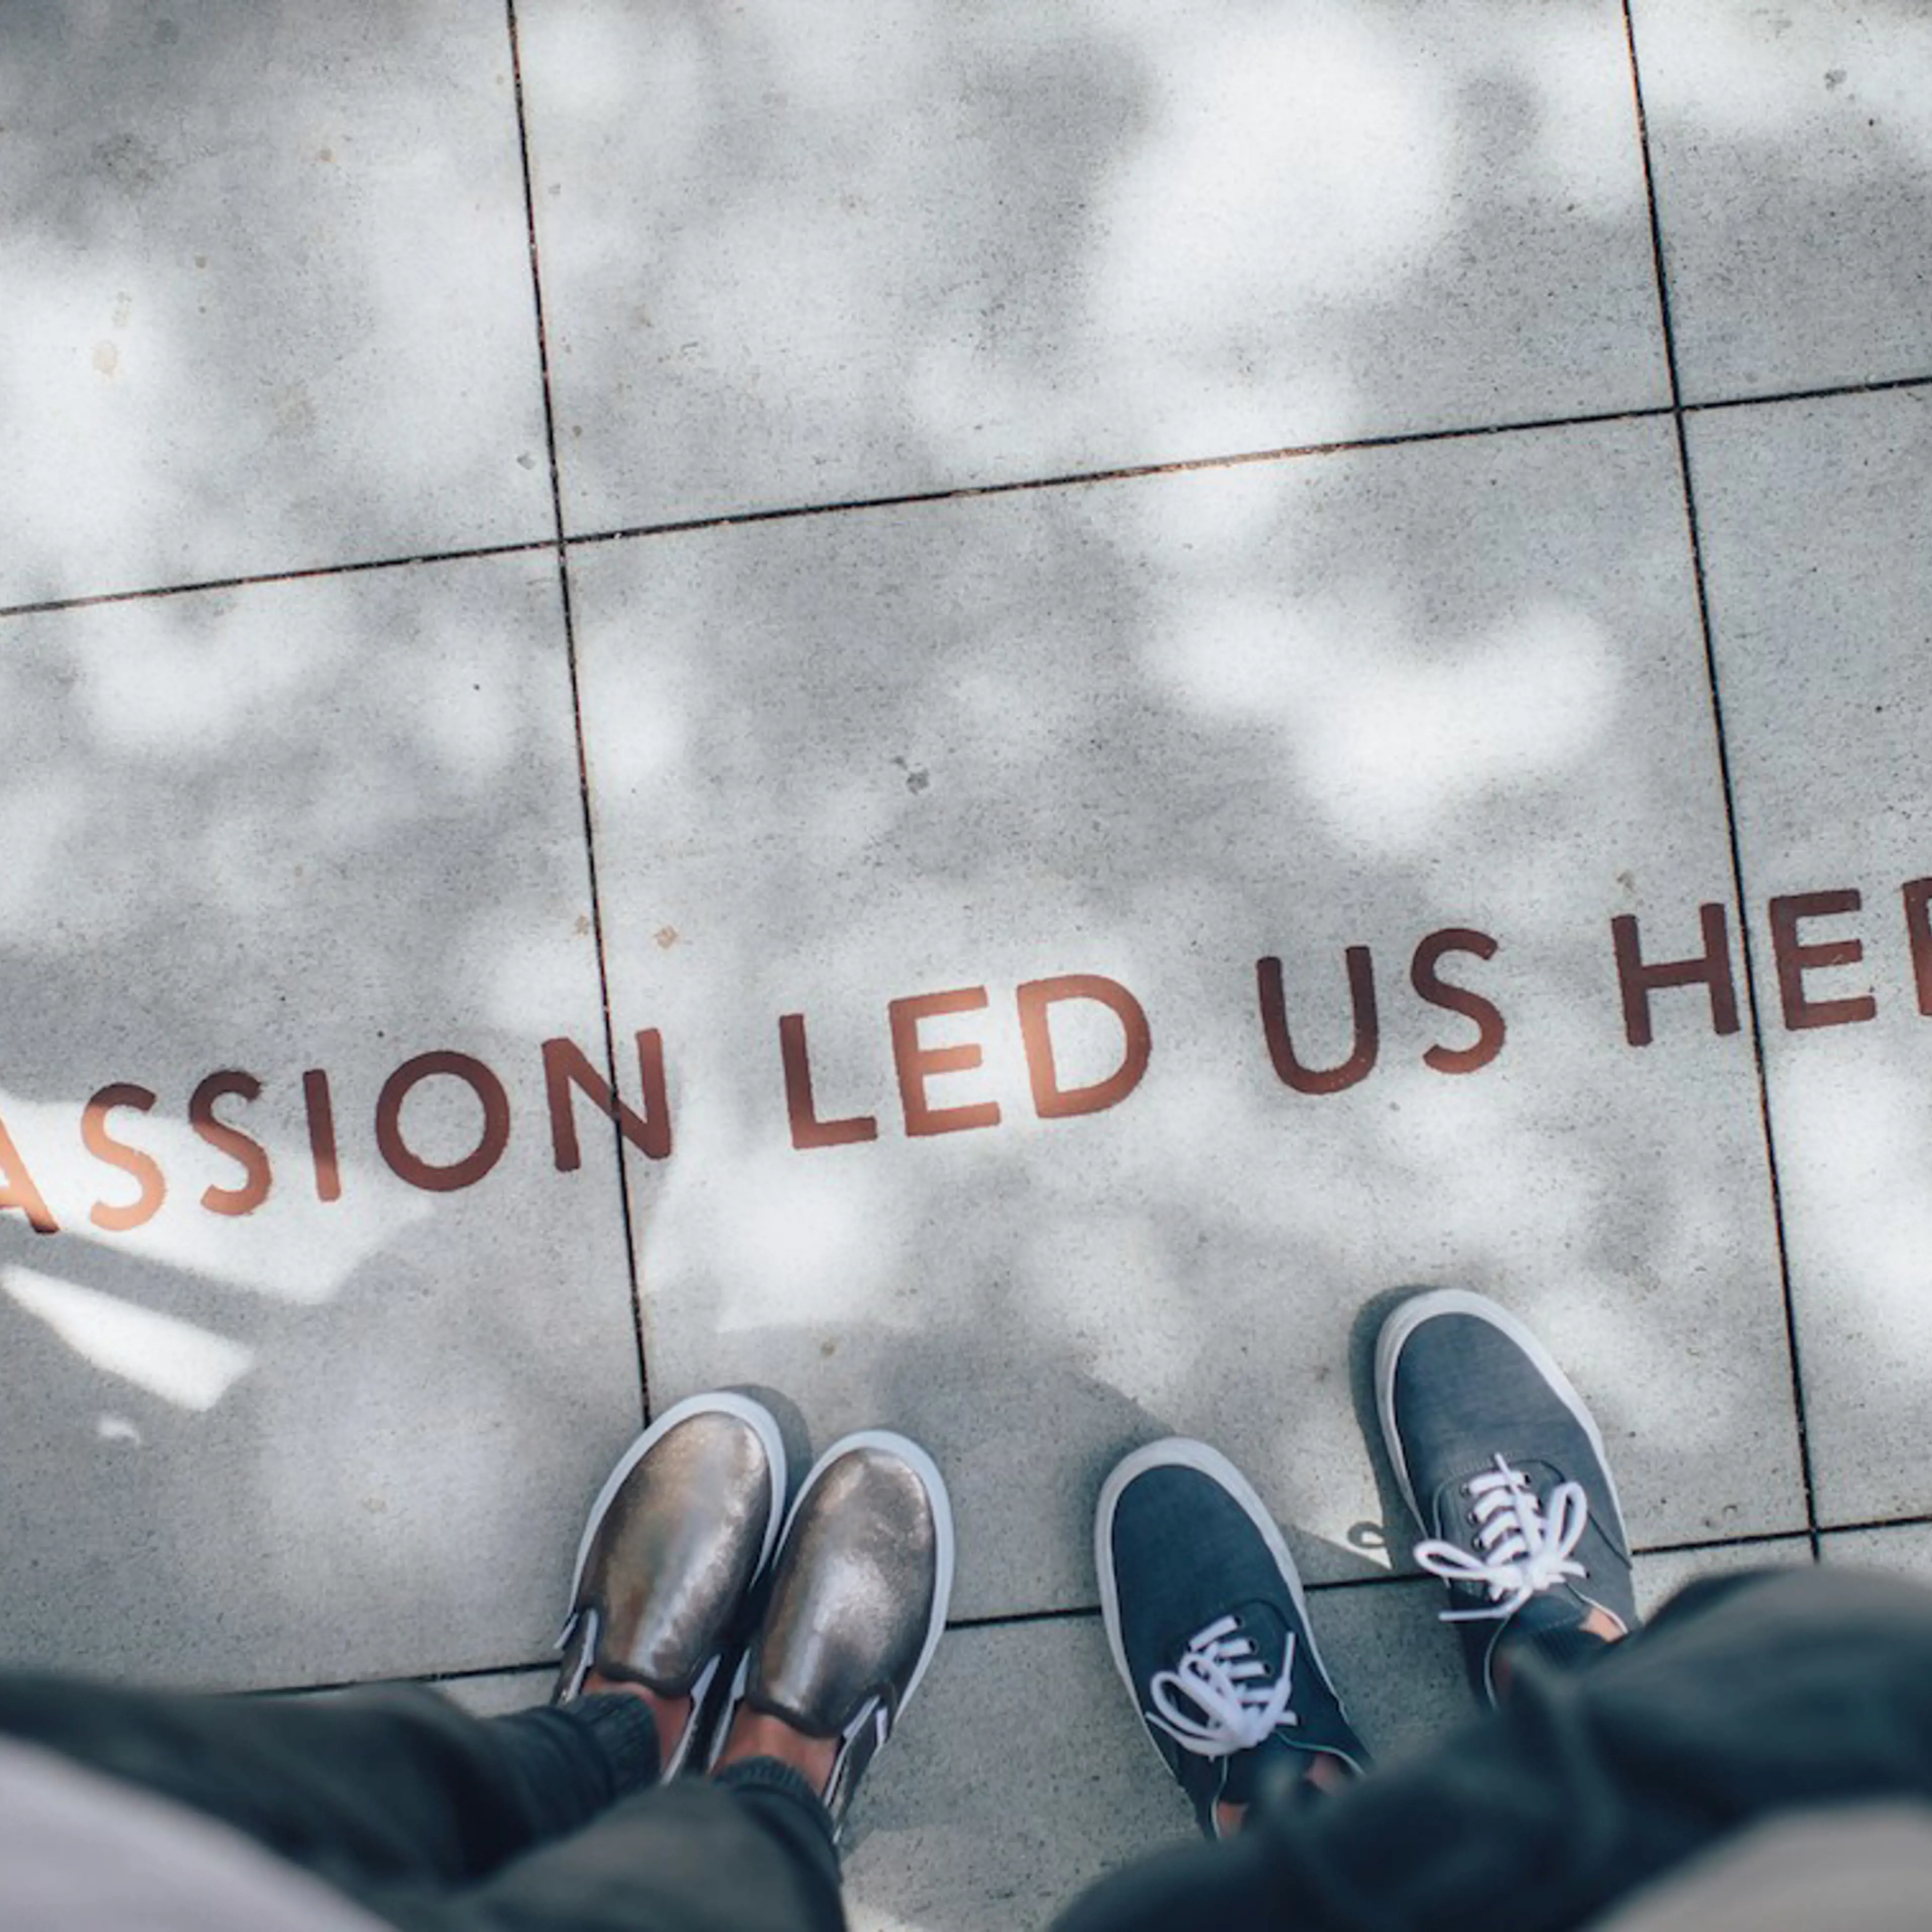 "Passion led us here" printed on floor tiles, and seen from above with 2 pairs of feet showing below it